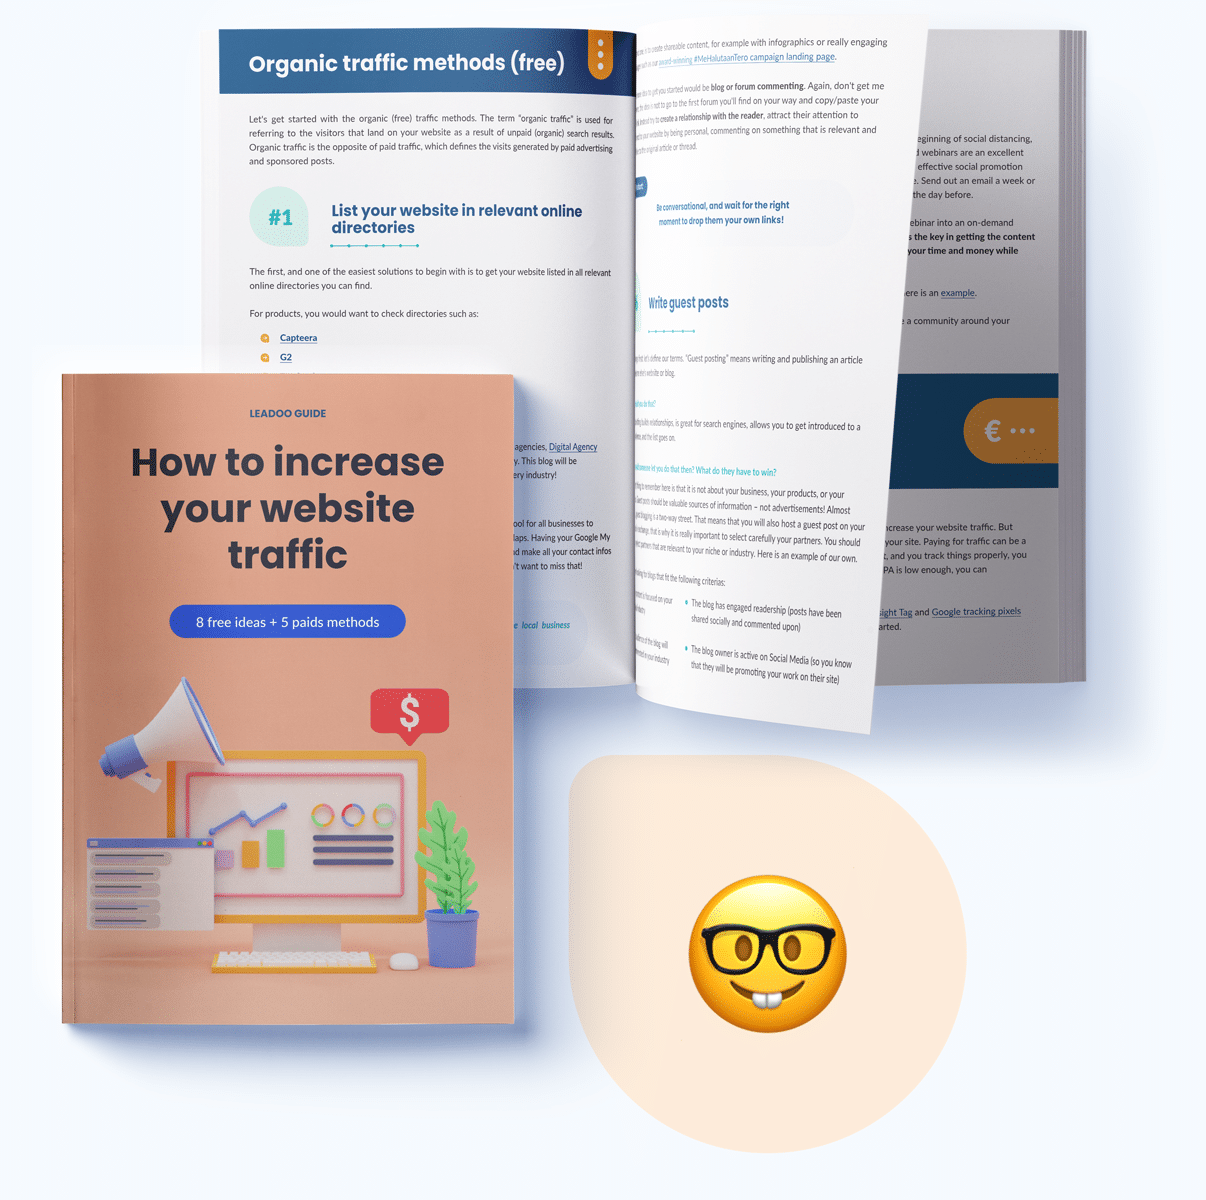 How to increase your website traffic? (8 free ideas and 5 paid methods)